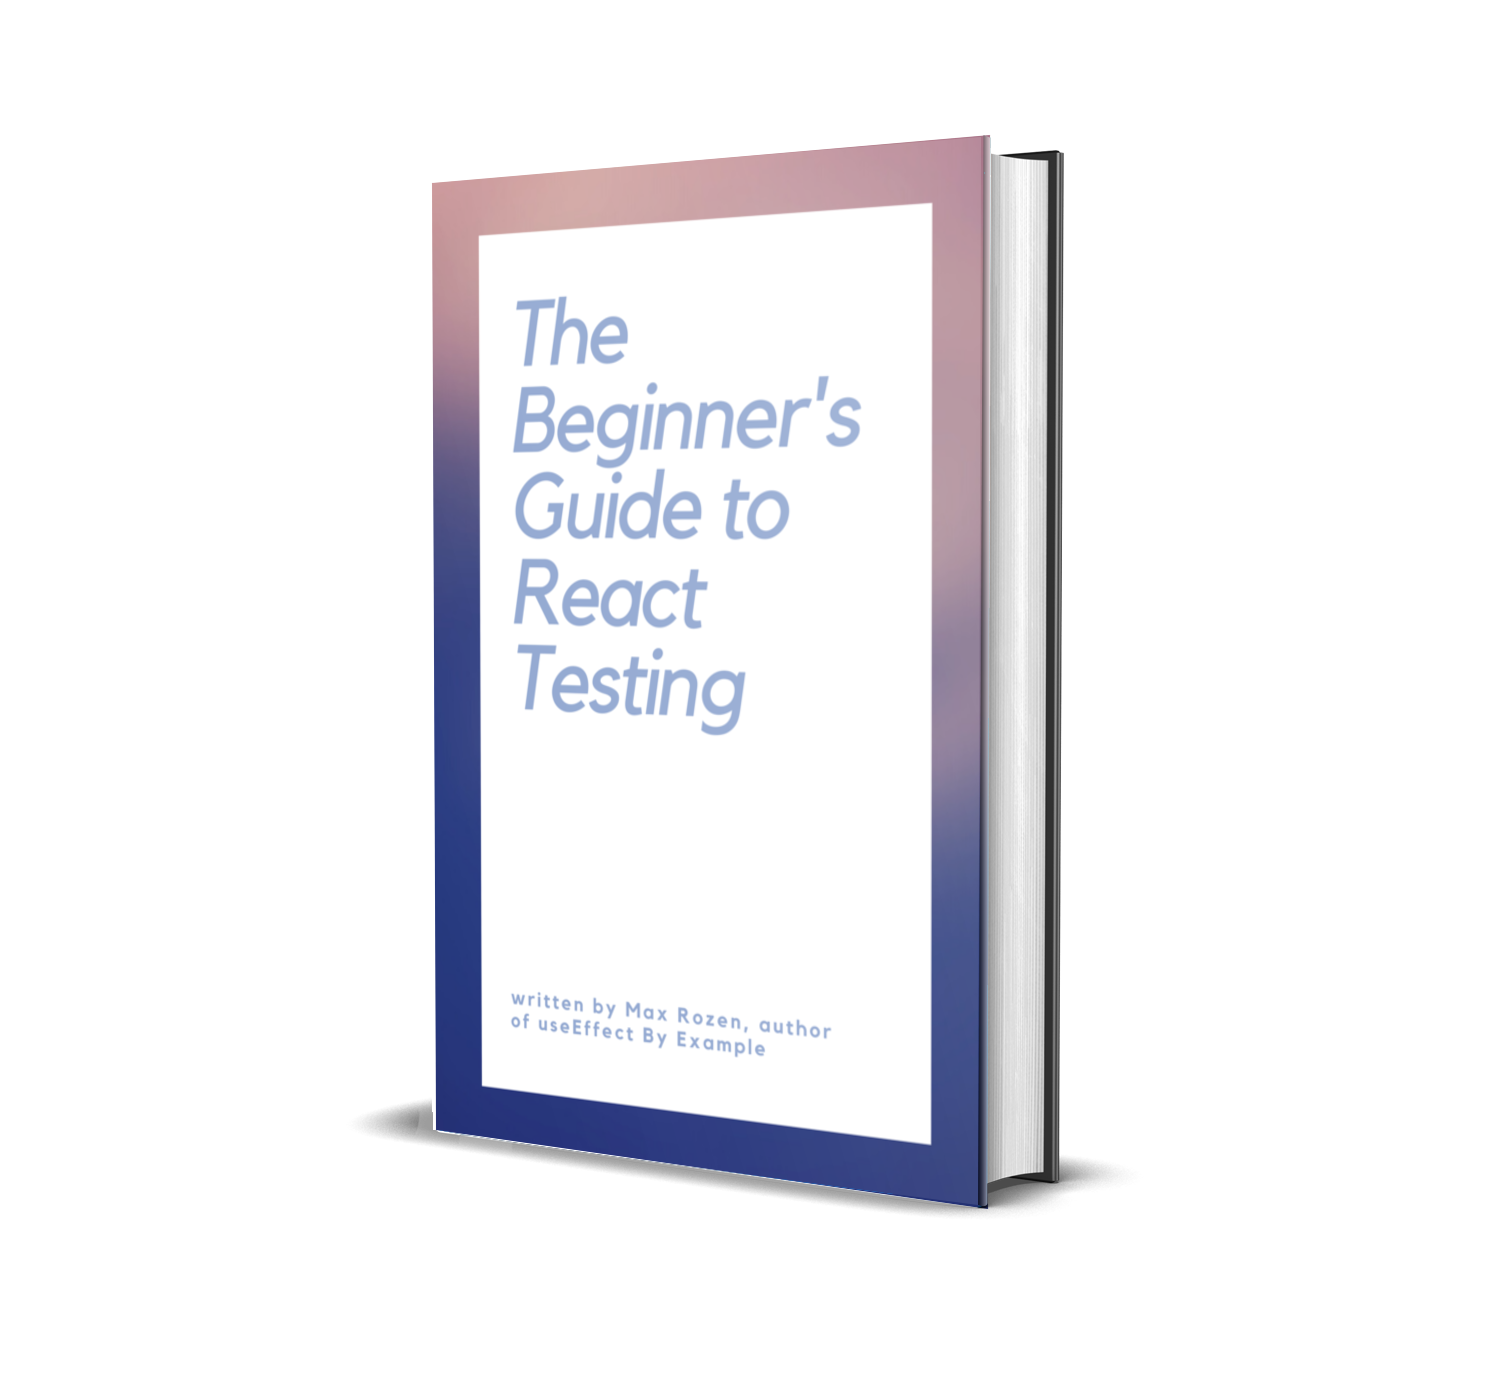 The Beginner's Guide to React Testing book cover